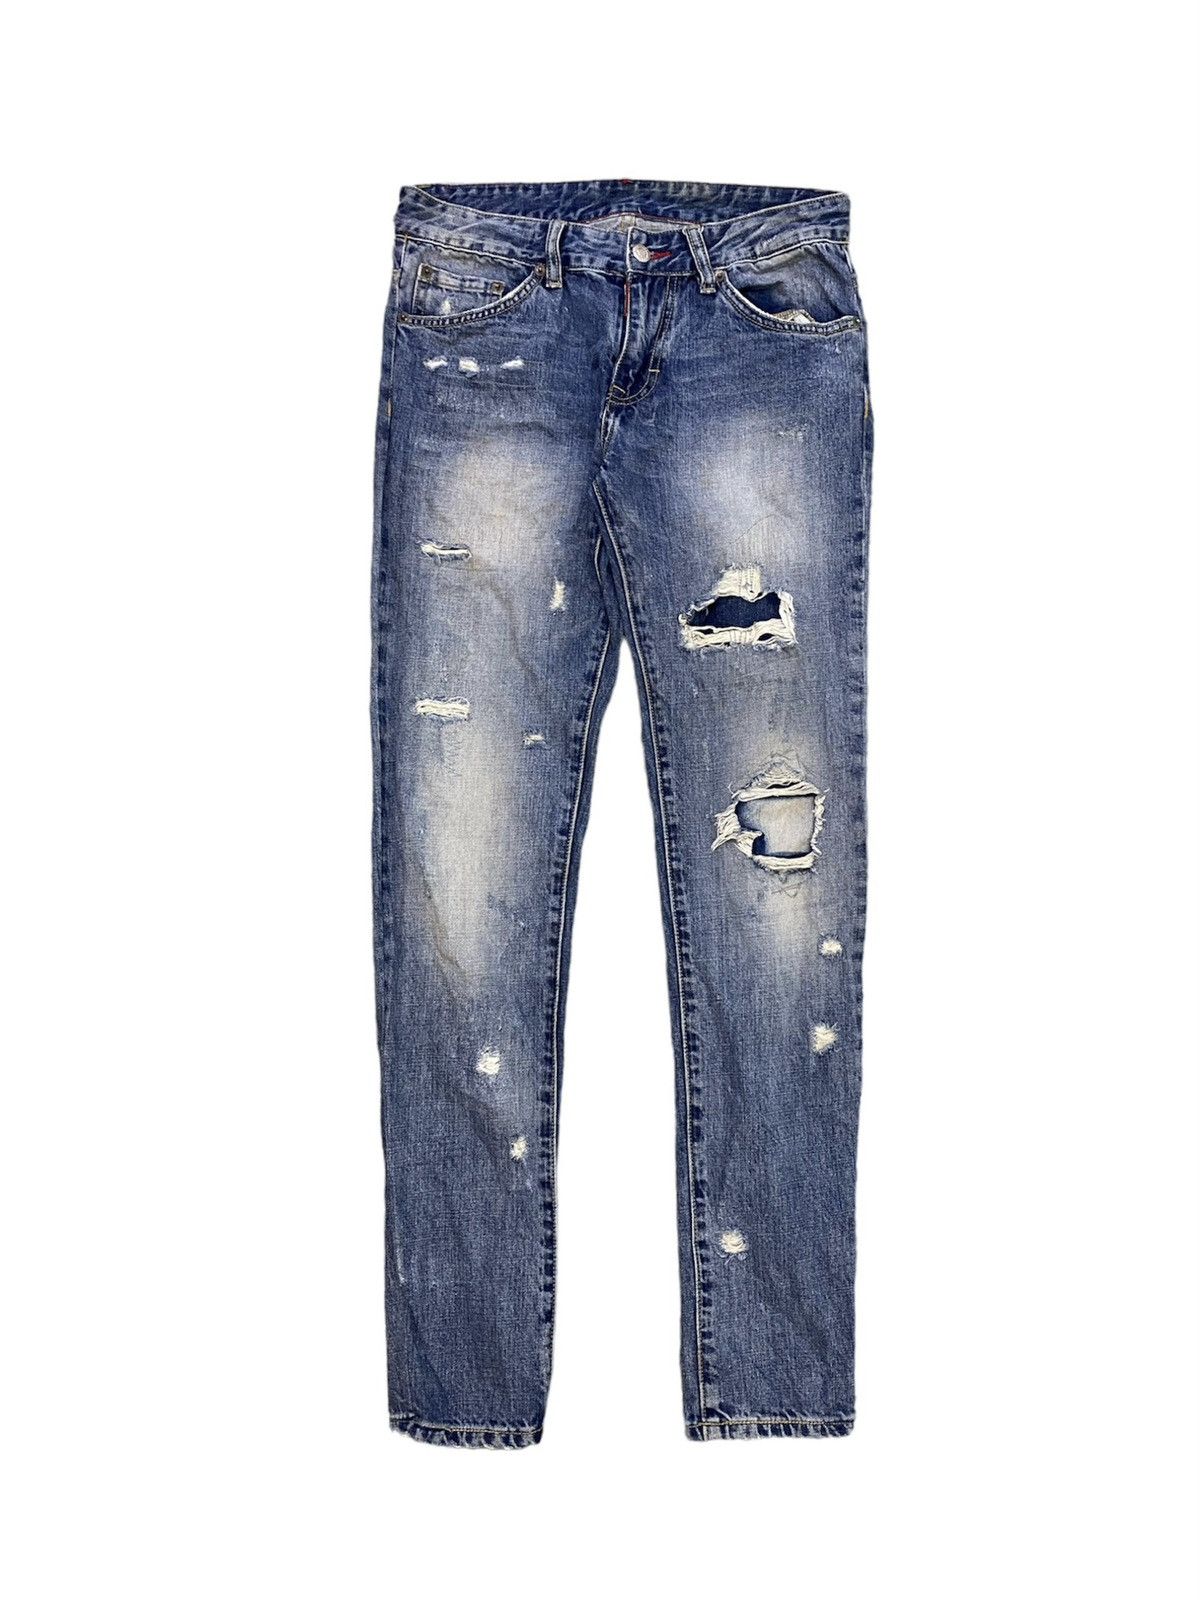 Dsquared2 Made in Italy Denim Distressed Jeans - 1